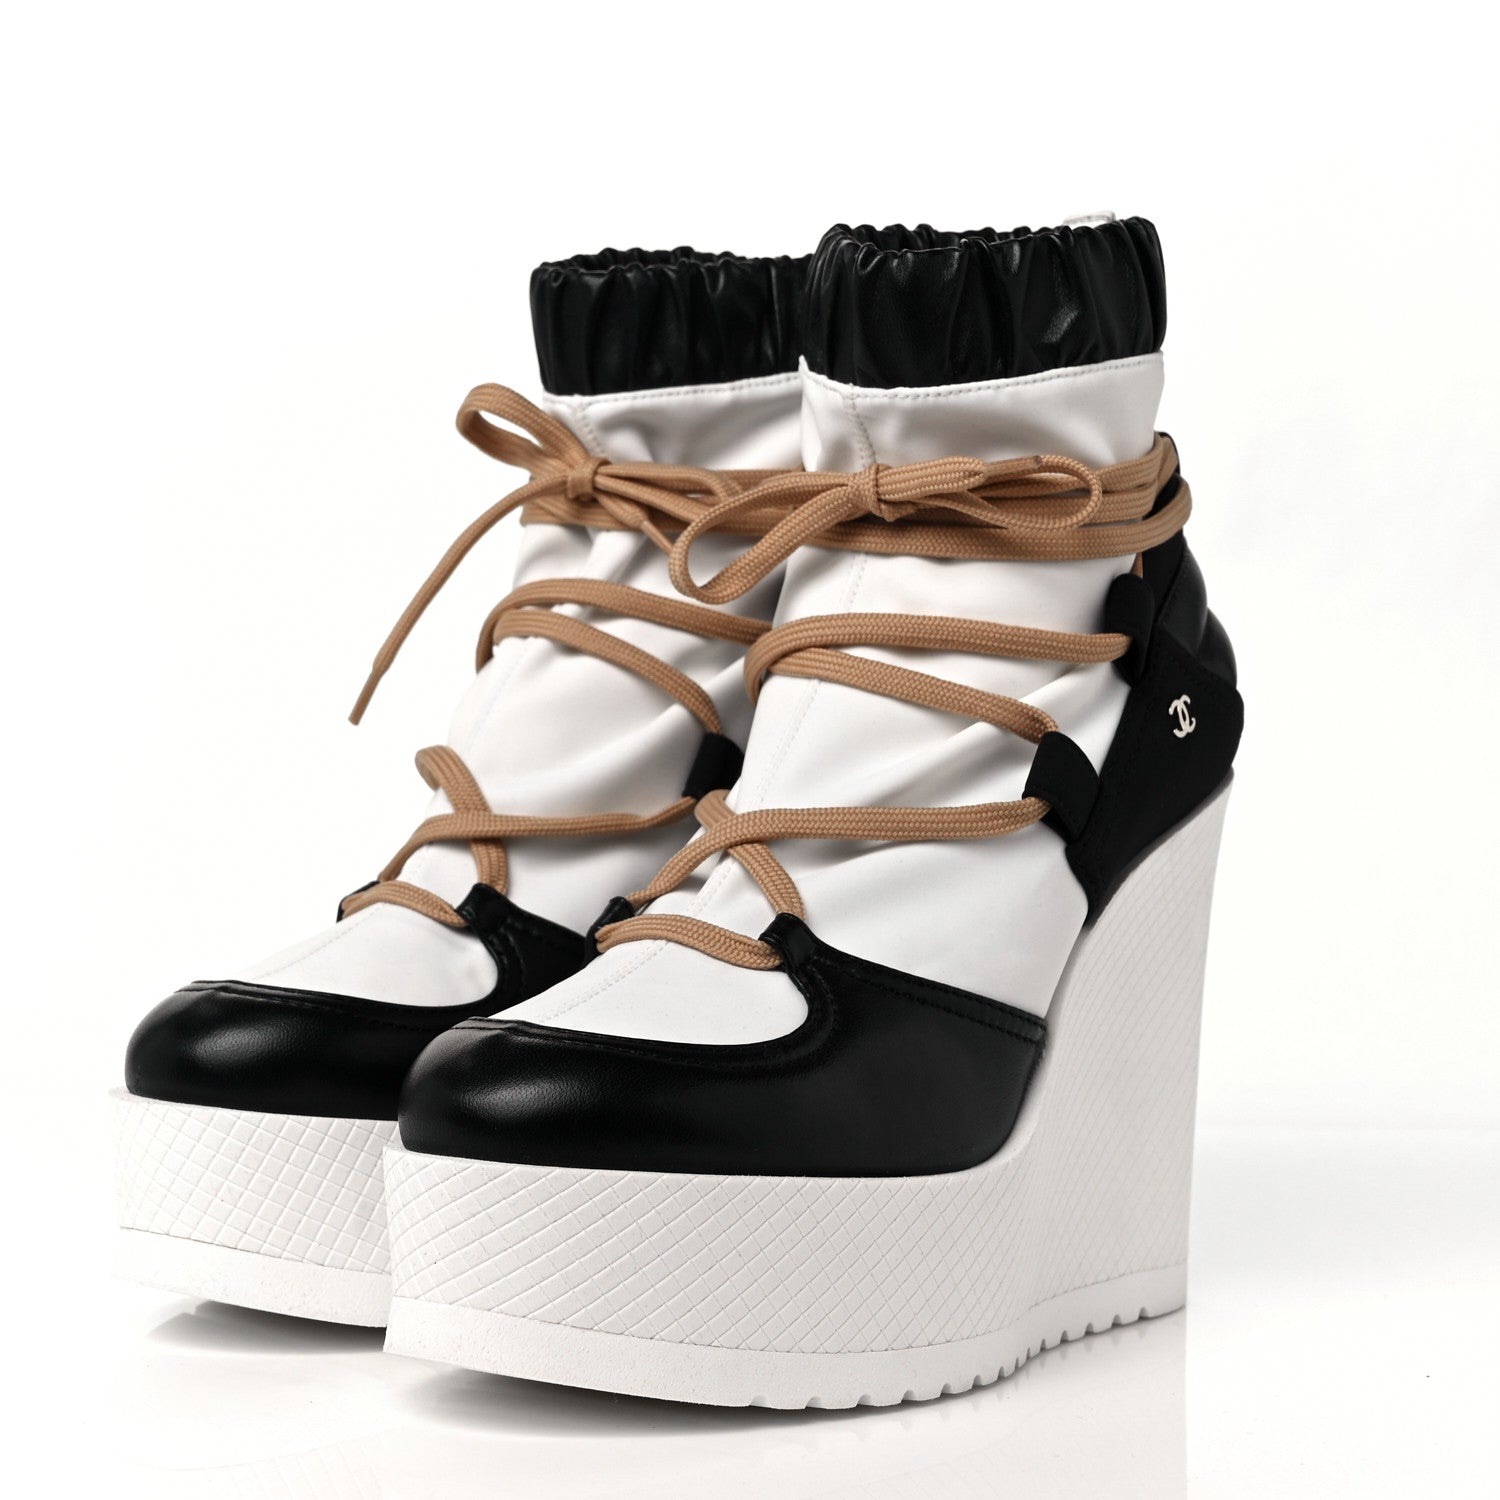 Chanel Mixed Material Lace-up Wedge Platforms - Ann's Fabulous Closeouts